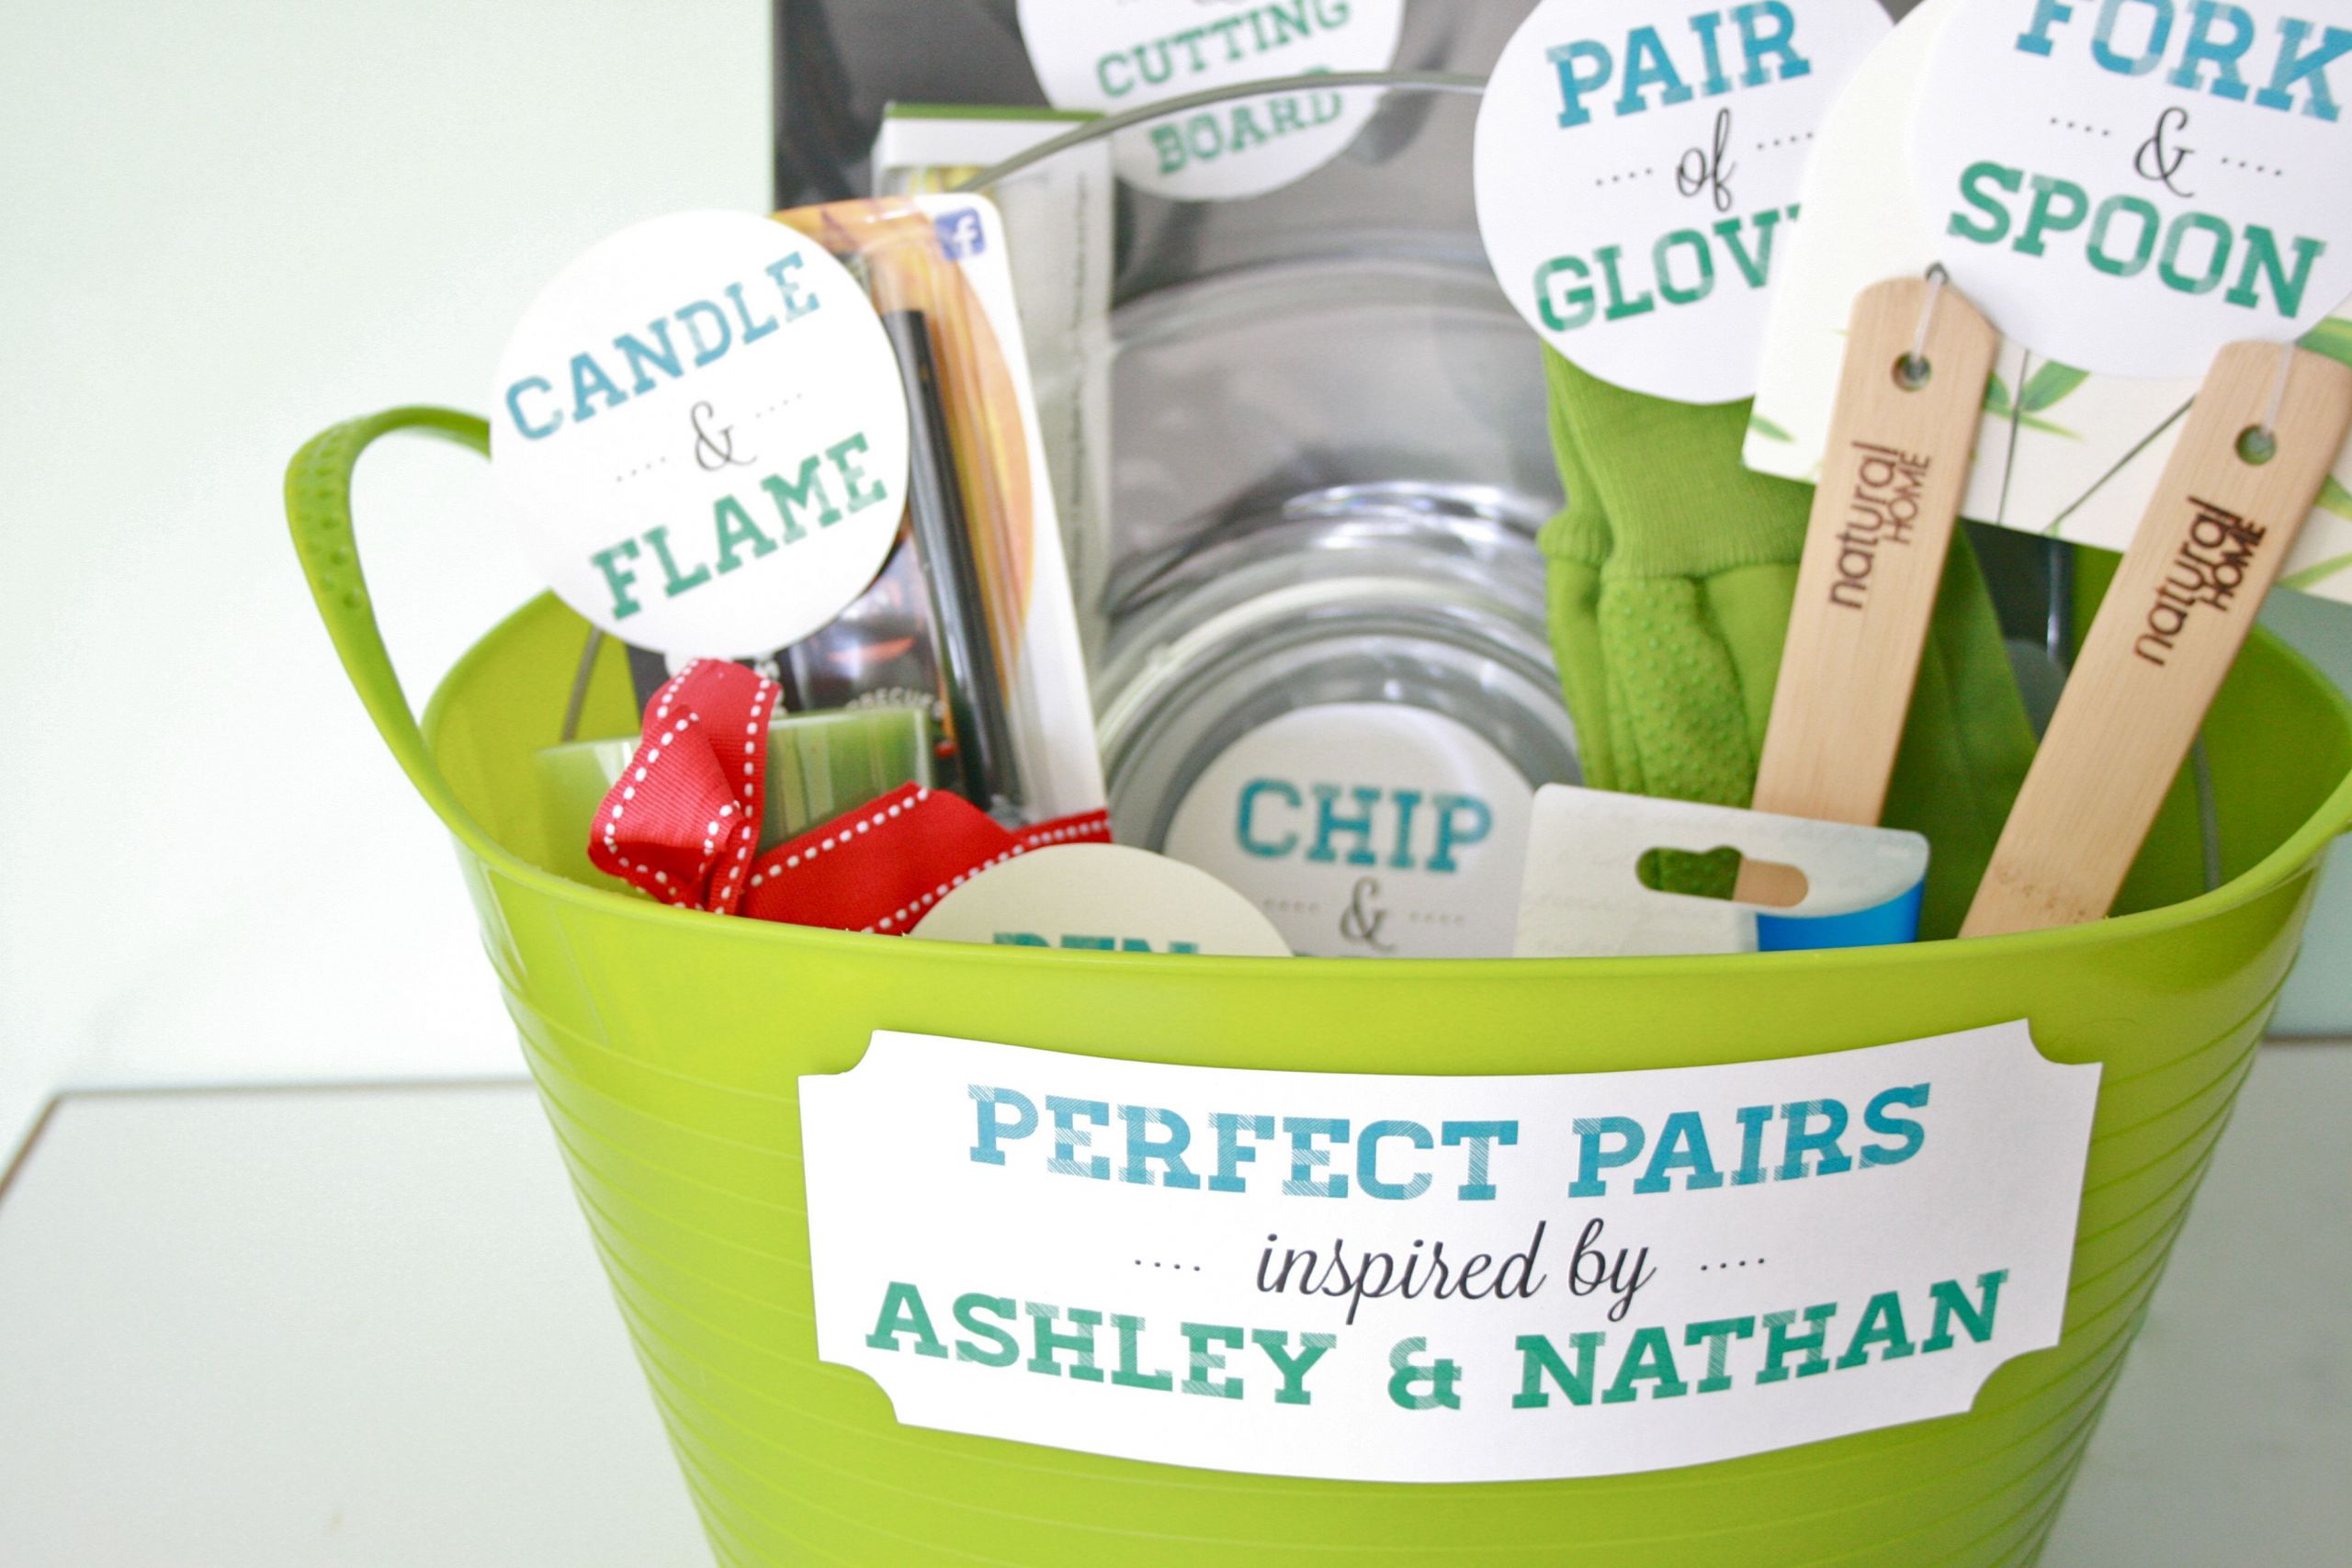 Couple Shower Gift Ideas
 DIY "Perfect Pairs" Bridal Shower Gift